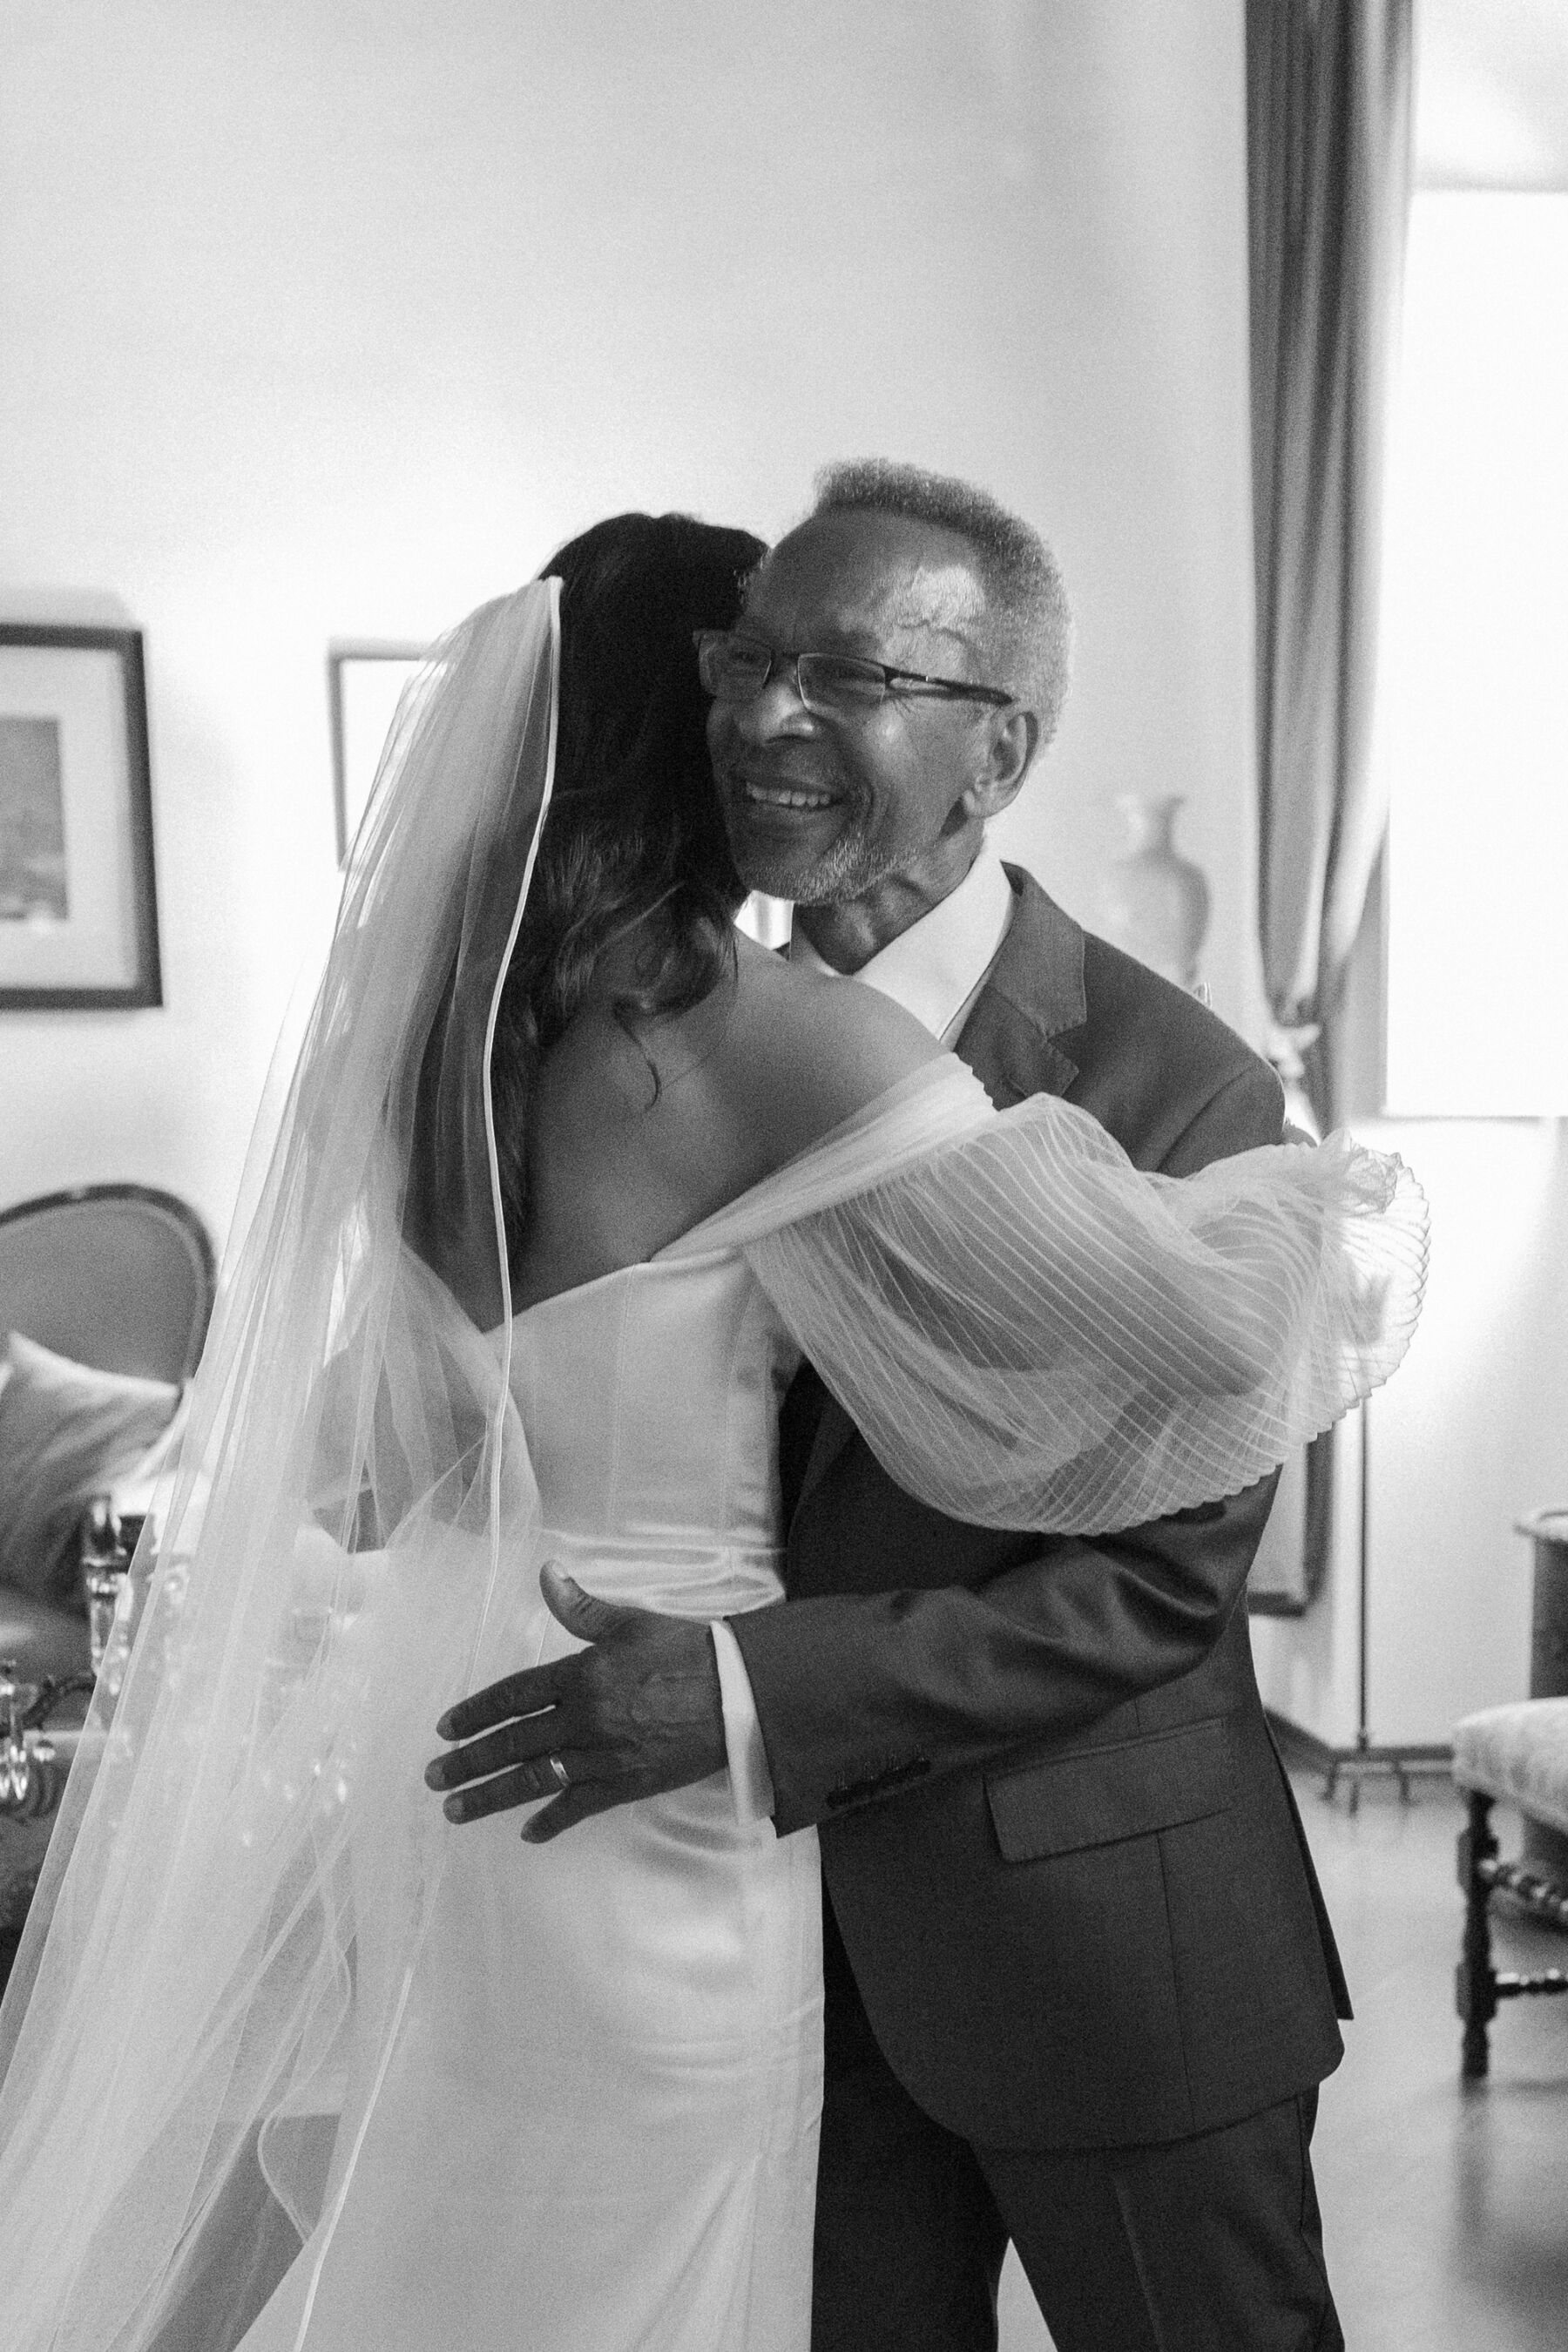 Photography of the back of a bride in an Alena Leena wedding dress, hugging her father who looks happy and joyous.